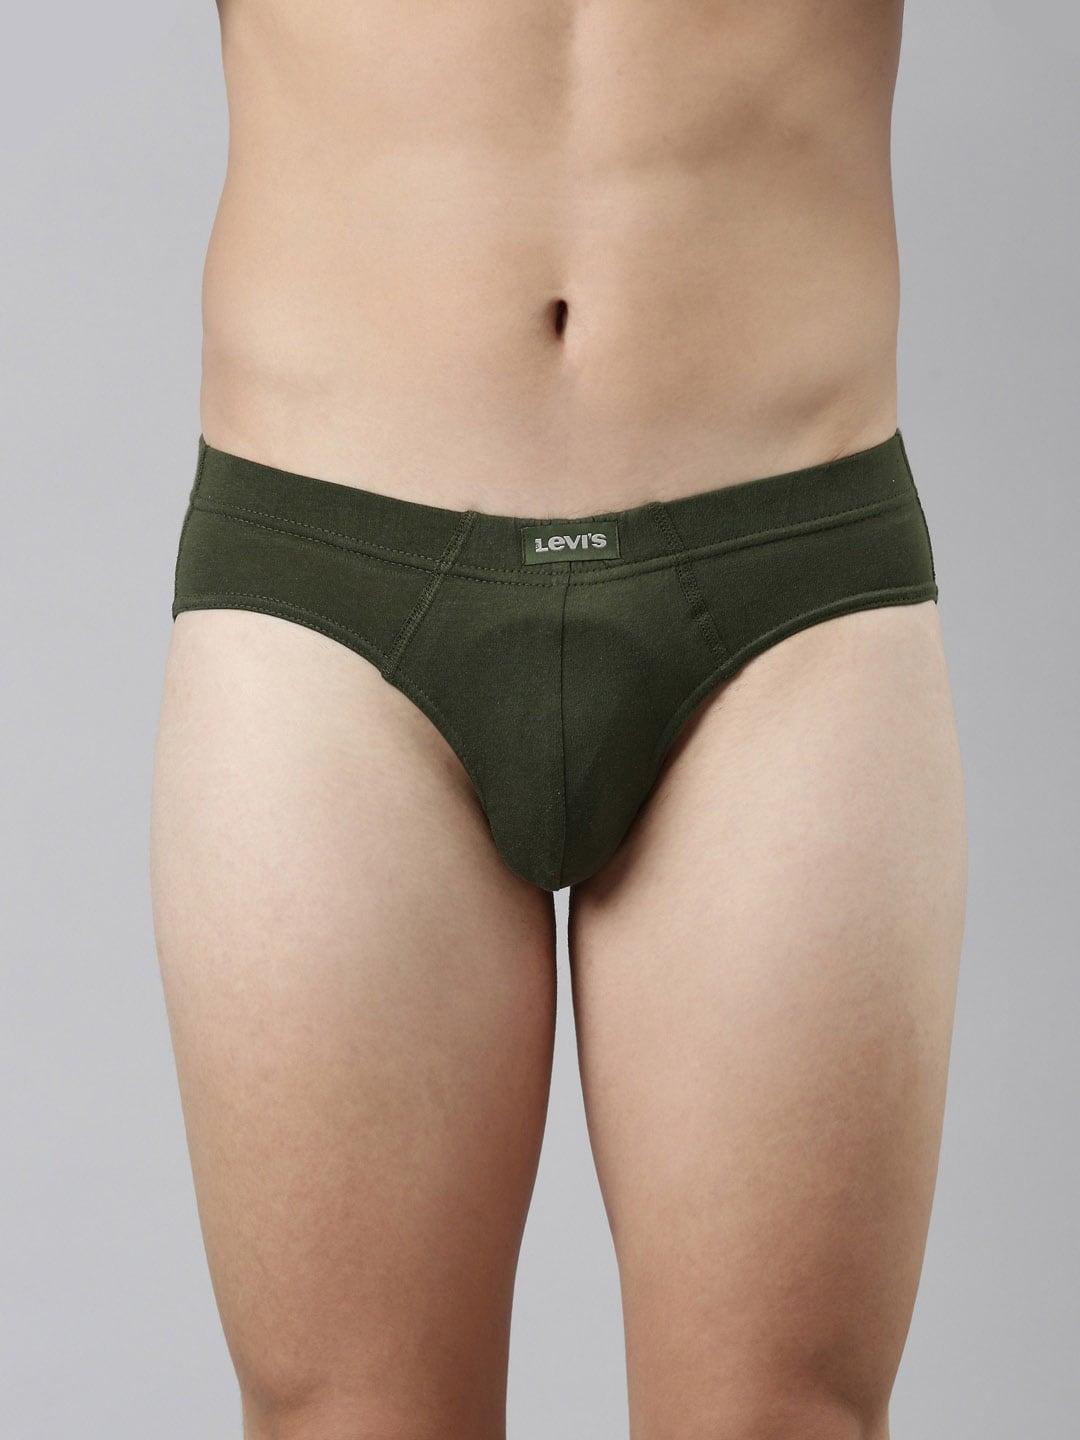 levis-men-comfort-solid-low-rise-basic-briefs-style#011-brief-riffle-green